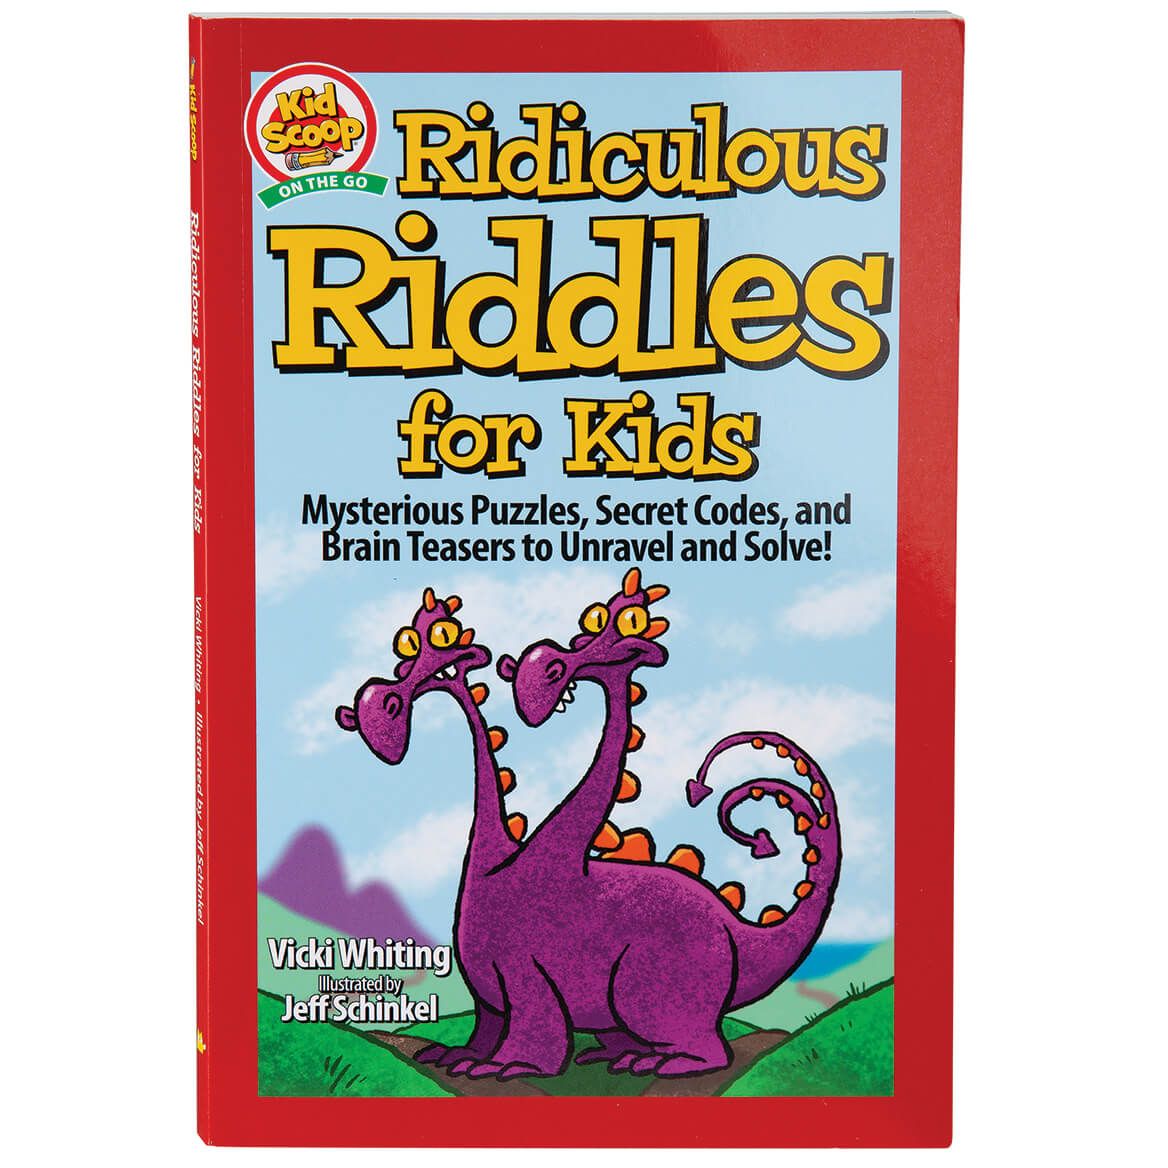 Ridiculous Riddles for Kids + '-' + 375655